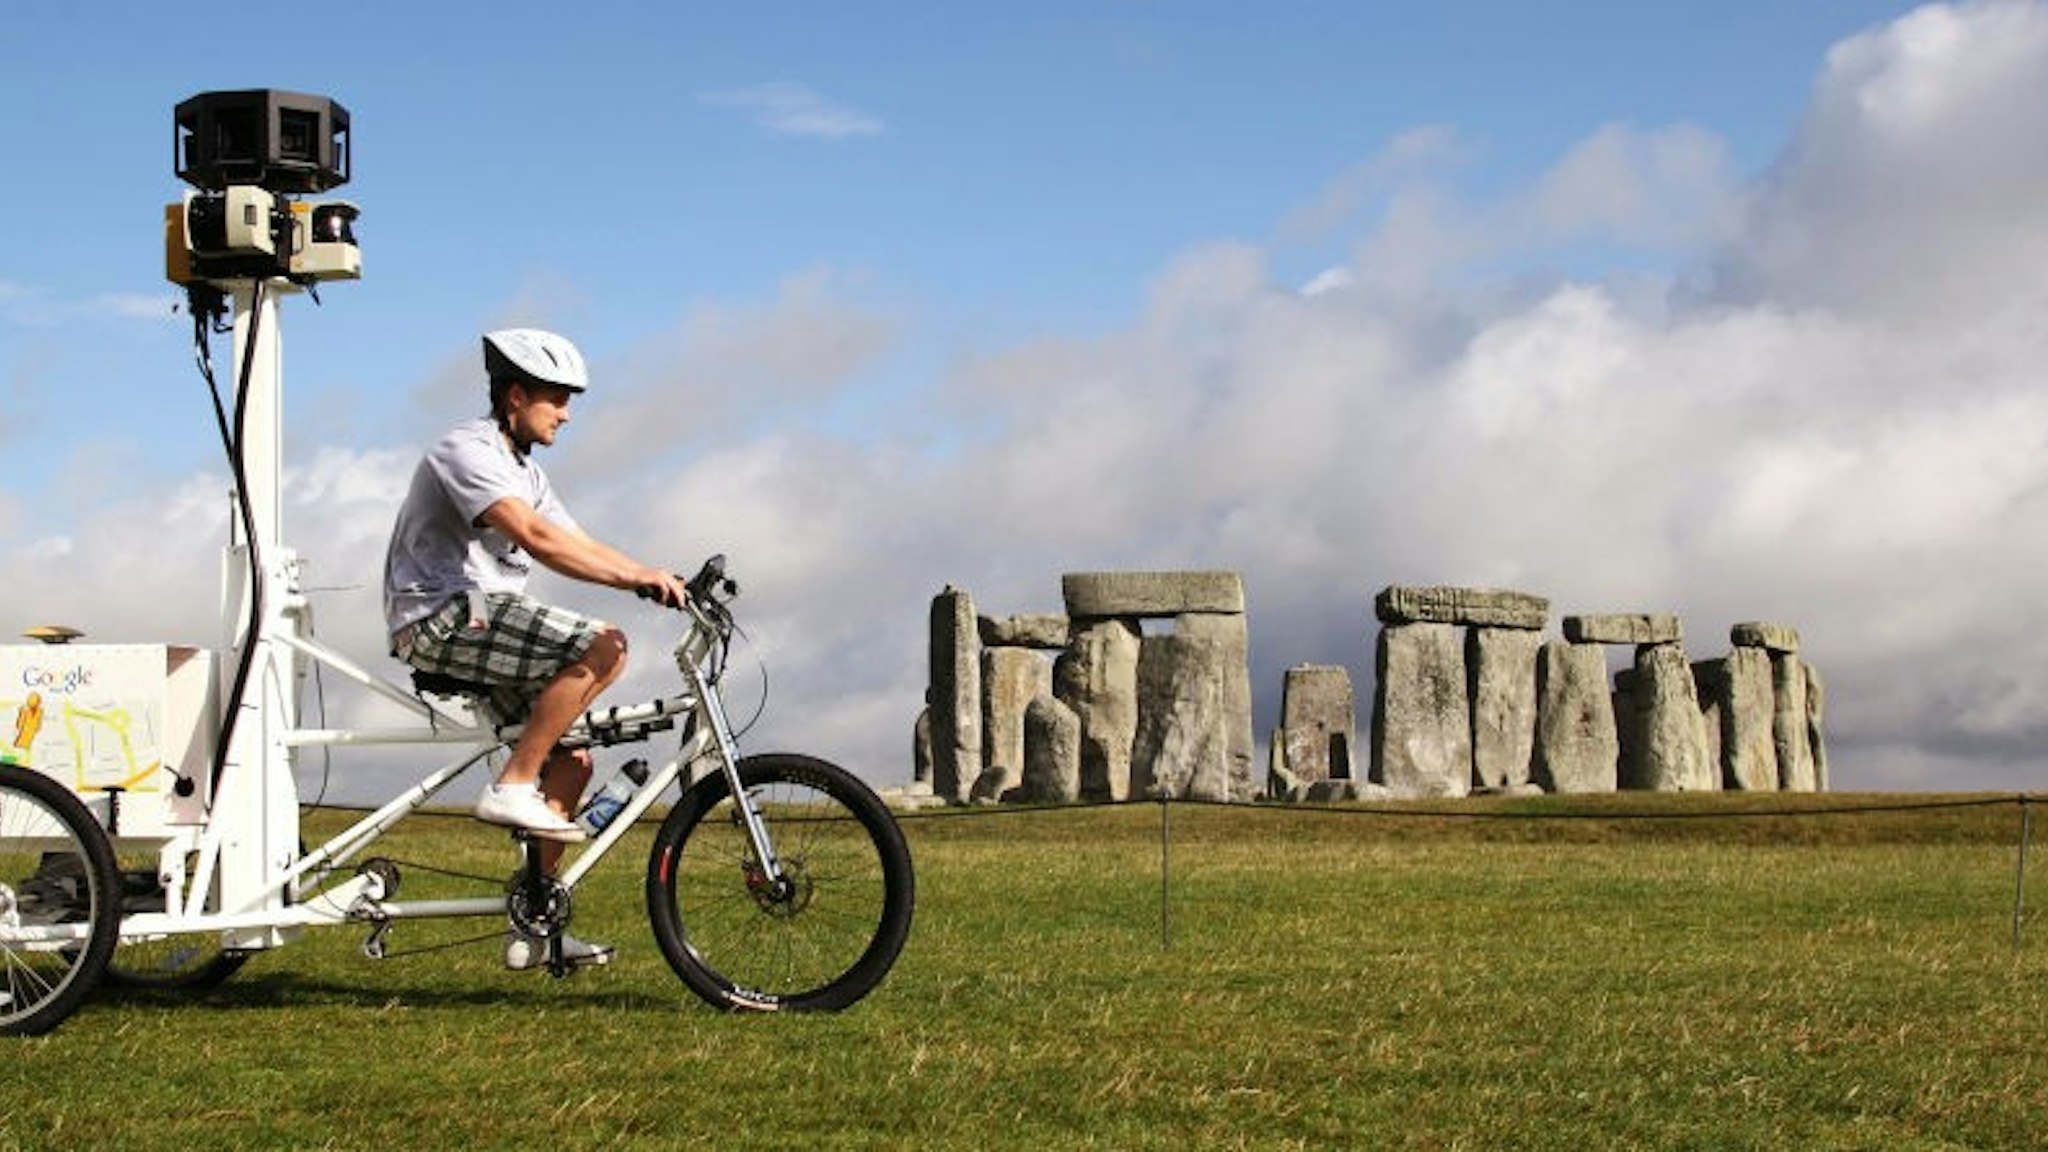 AMESBURY, ENGLAND - JULY 13: (UK TABLOIDS OUT) Google launch the Street Trike with VisitBritain at Stonehenge near Amesbury, on July 13, 2009 in Wiltshire, England. The British public voted for the top 6 tourist attractions they wished to be photographed by the Street View Trike. The images collected will later appear in Street View on Google Maps. (Photo by